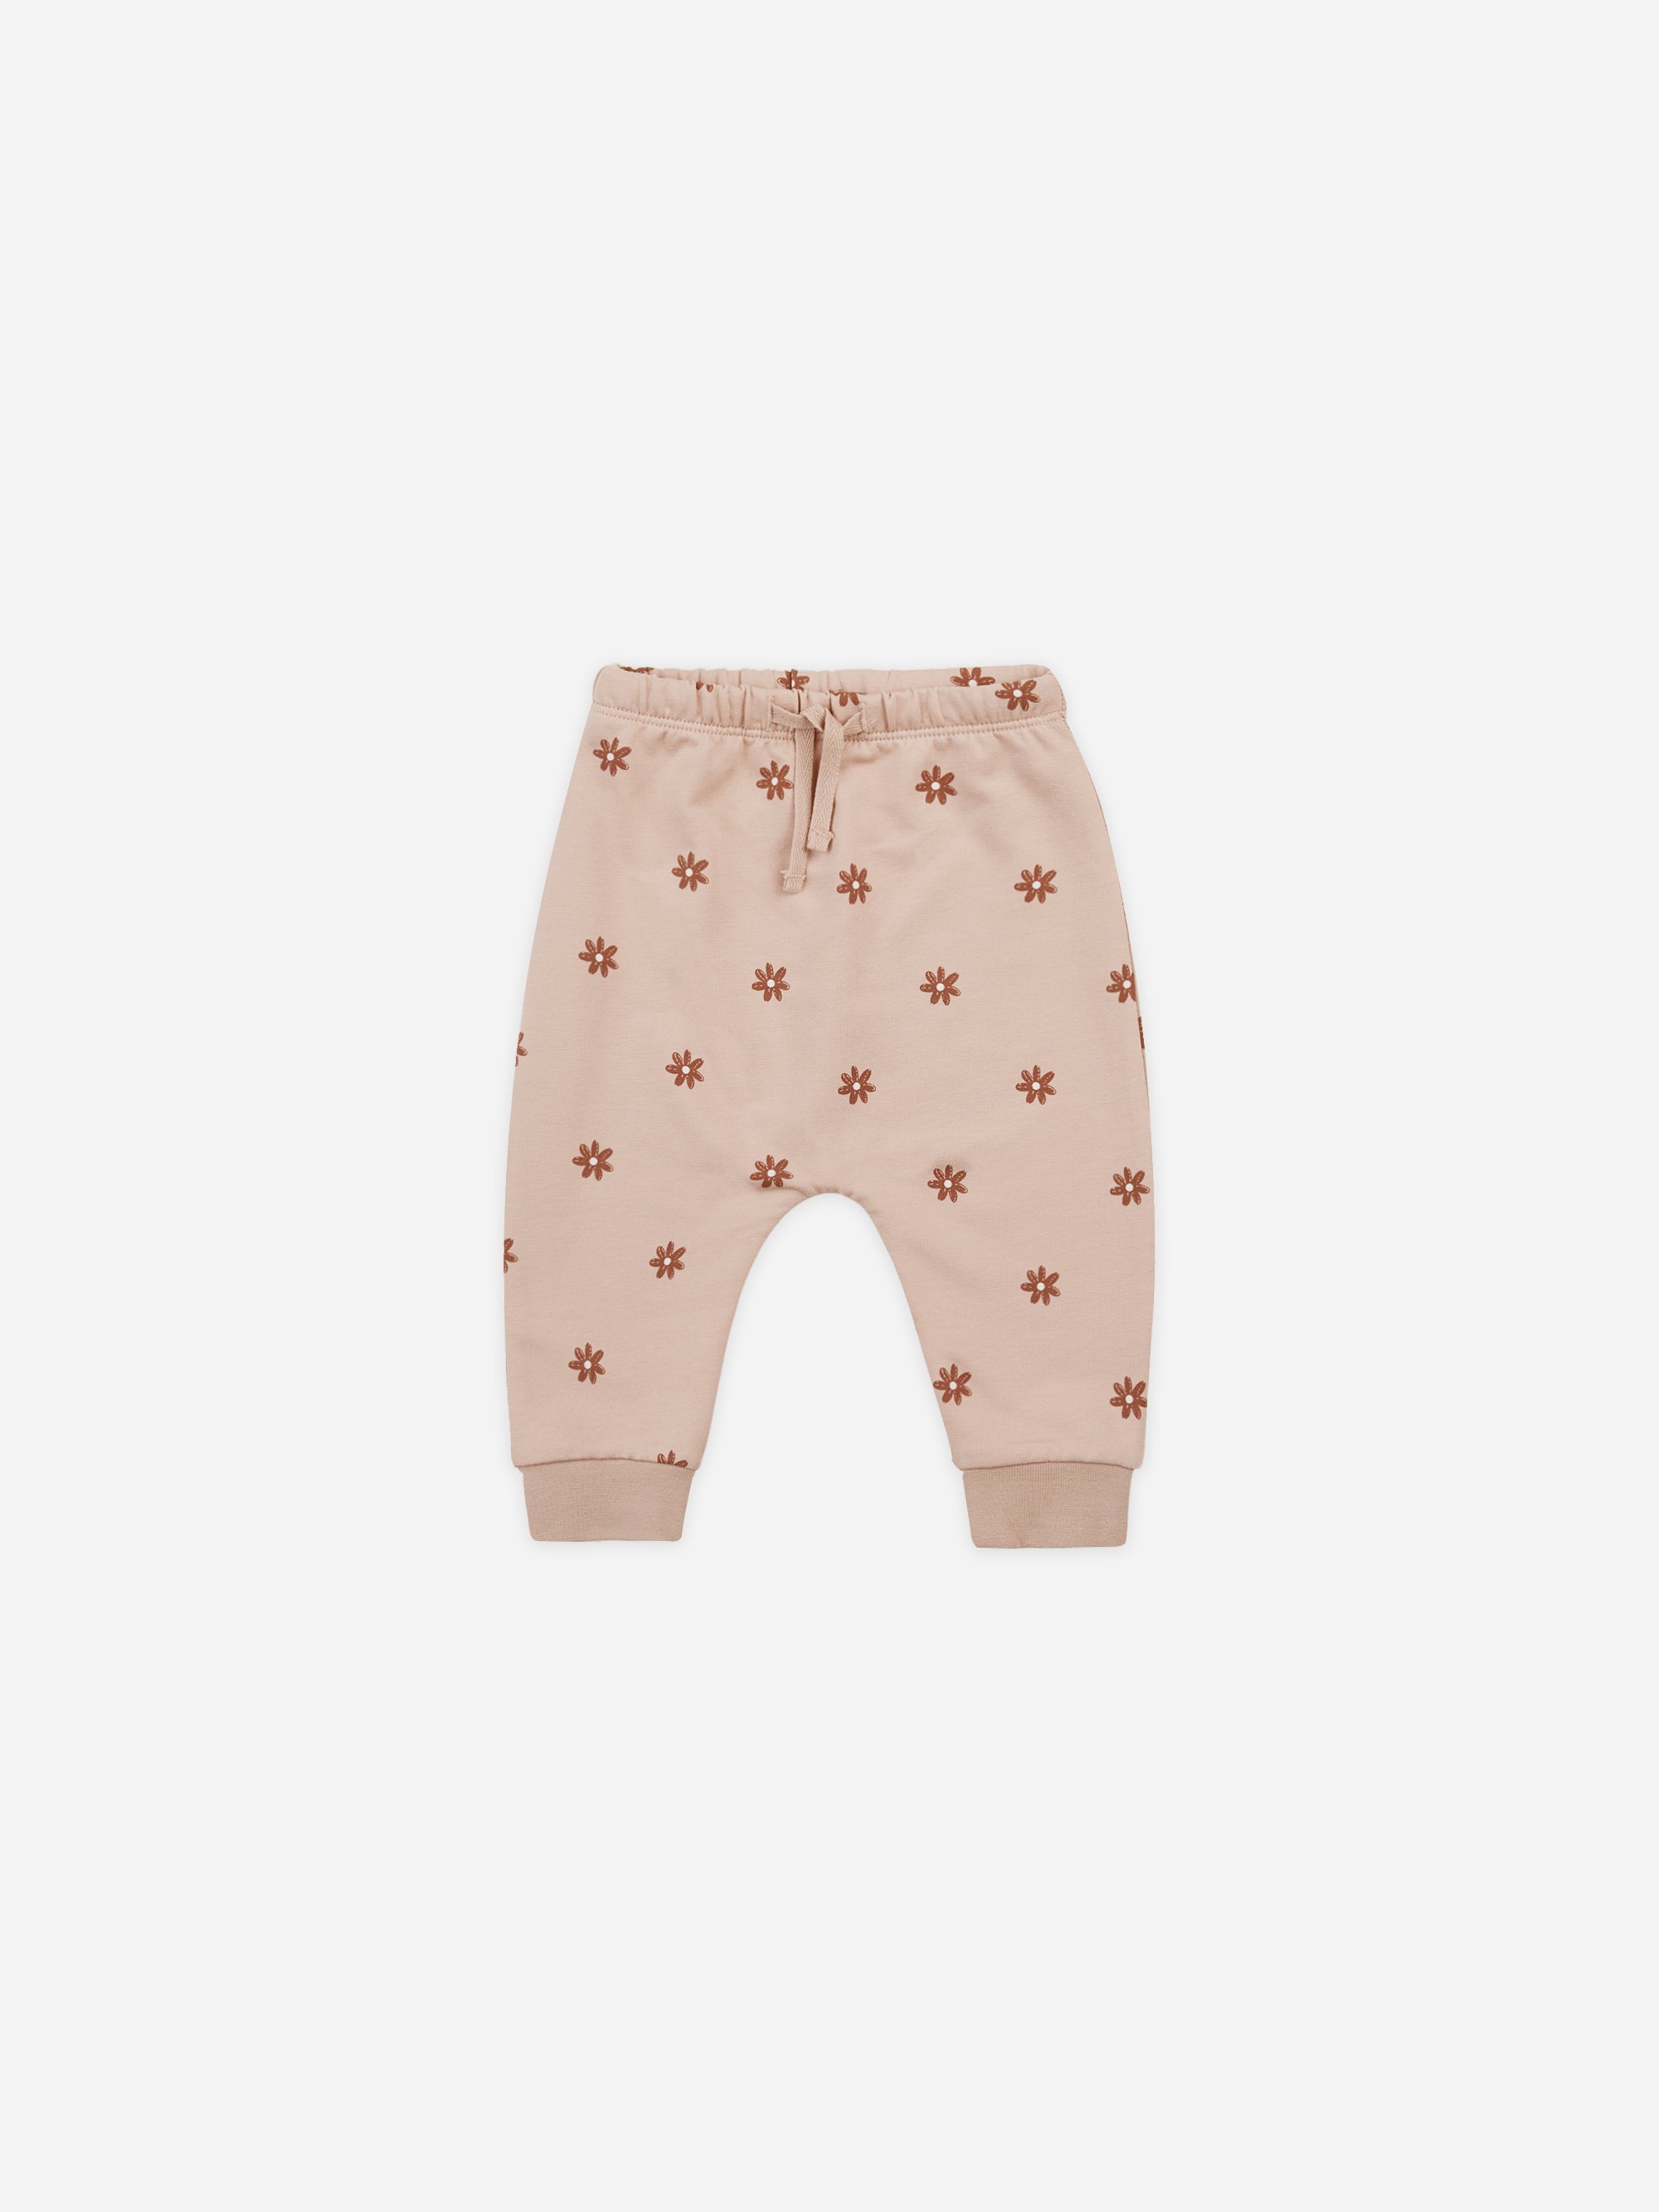 Sweatpant || Daisies - Rylee + Cru | Kids Clothes | Trendy Baby Clothes | Modern Infant Outfits |